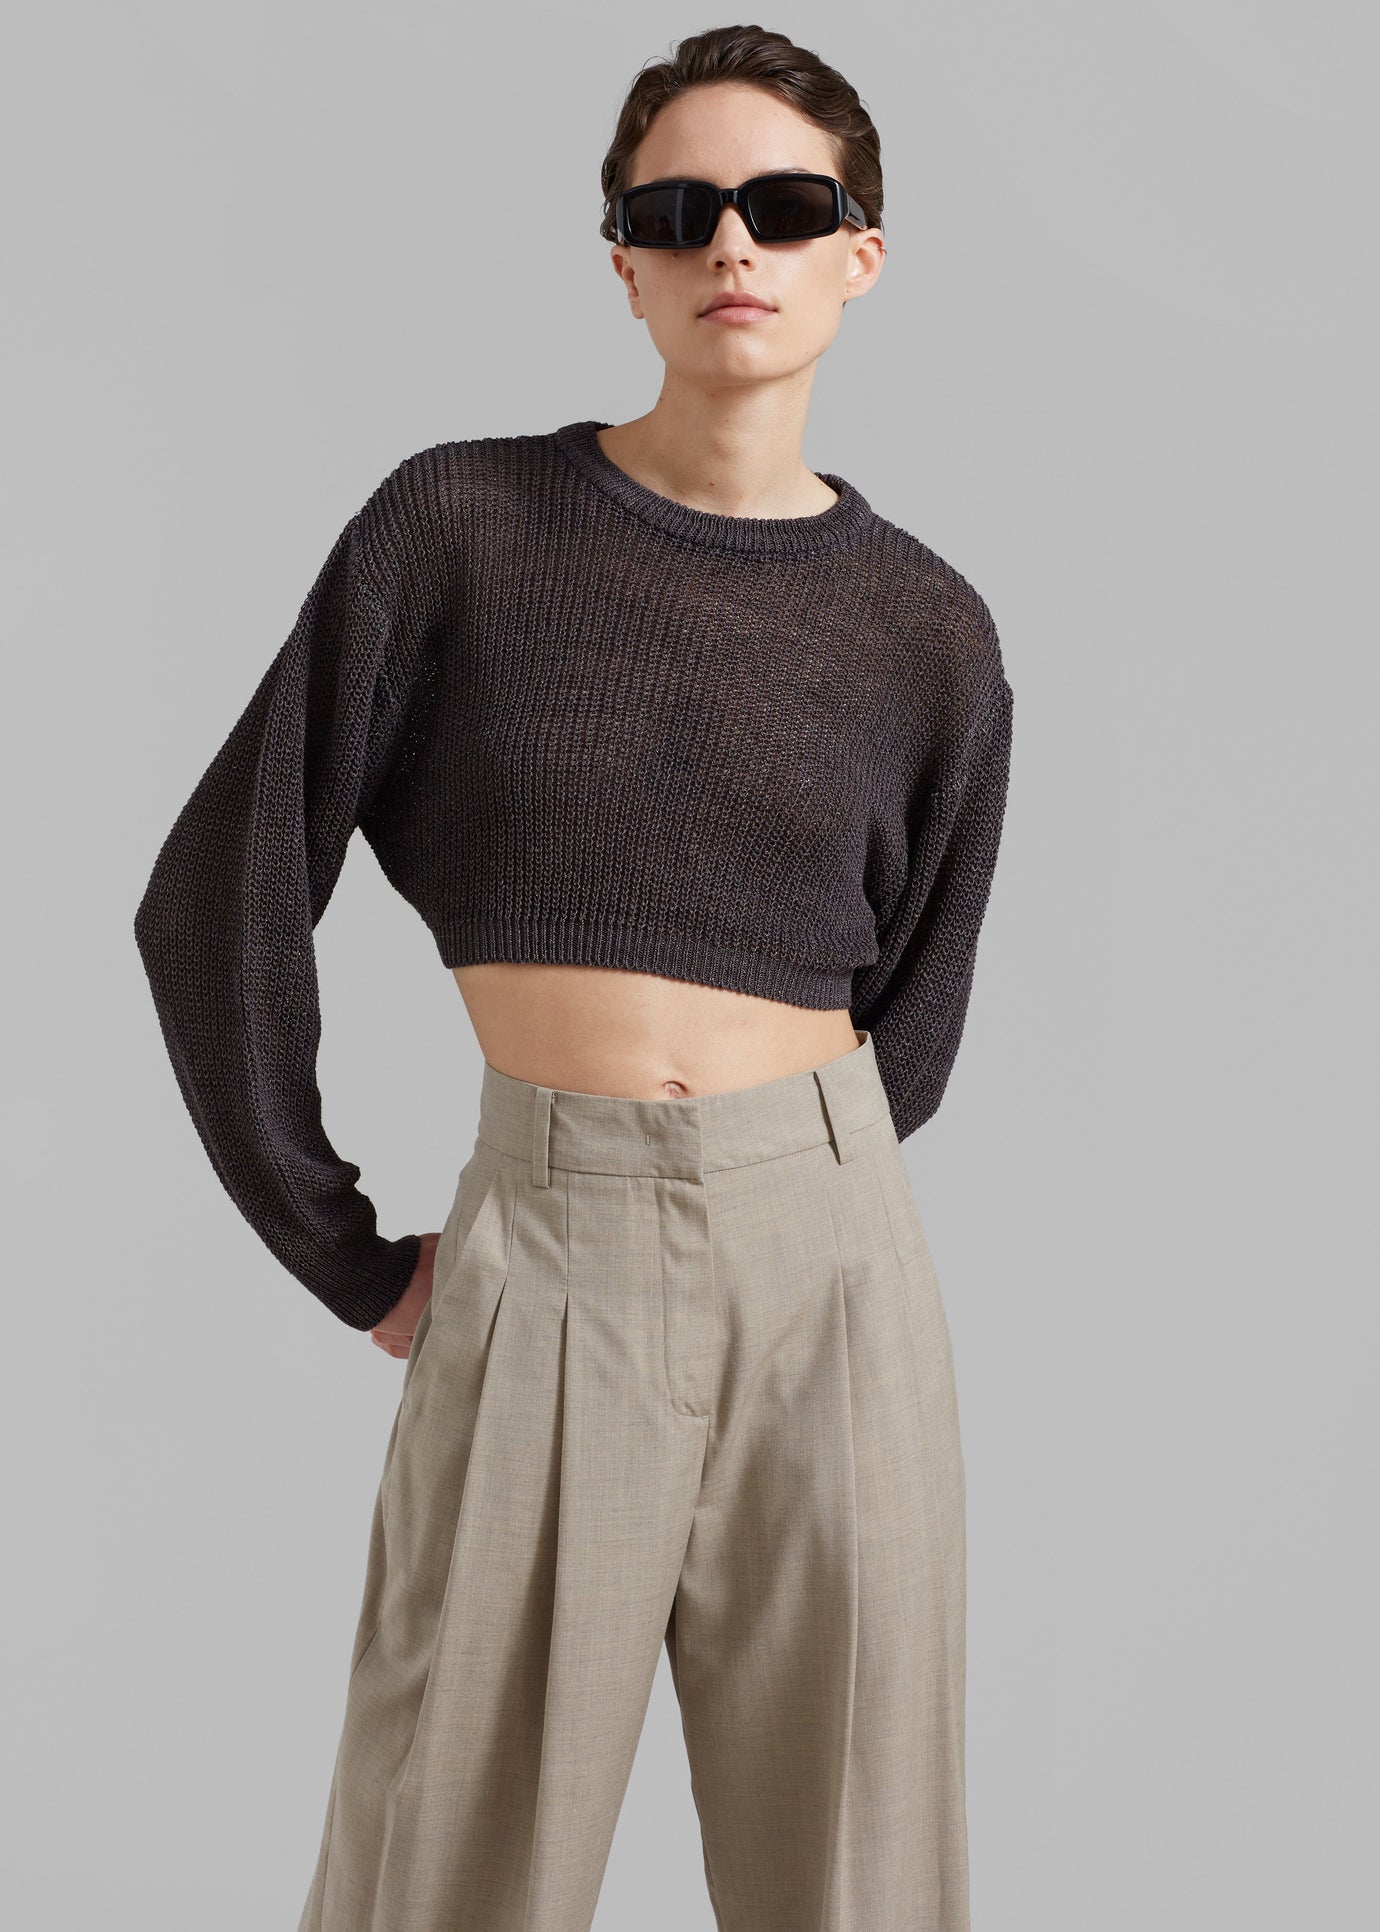 Abi Cropped Knit Top - Charcoal